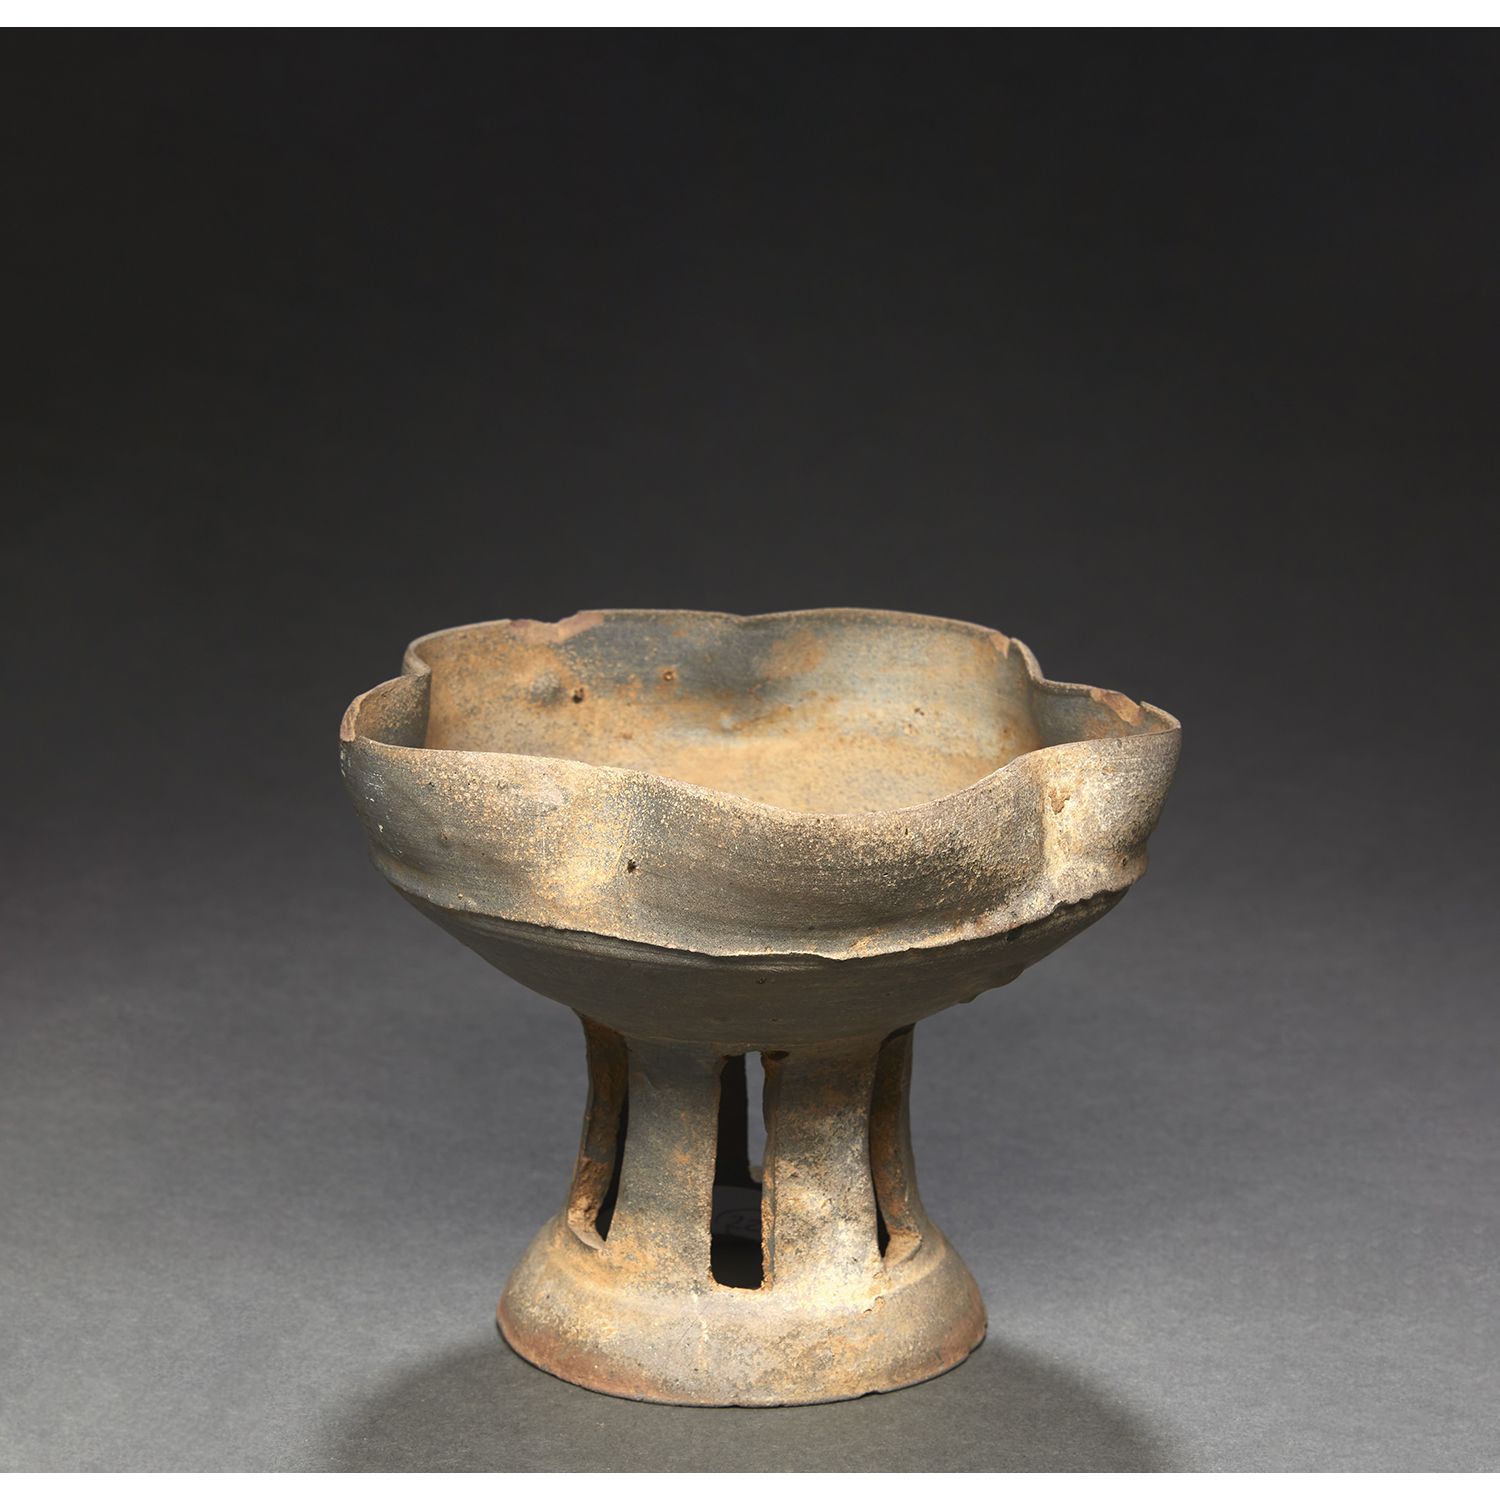 Null RECIPIENT
in stoneware, the bowl of poly-lobed form, mounted on a high heel&hellip;